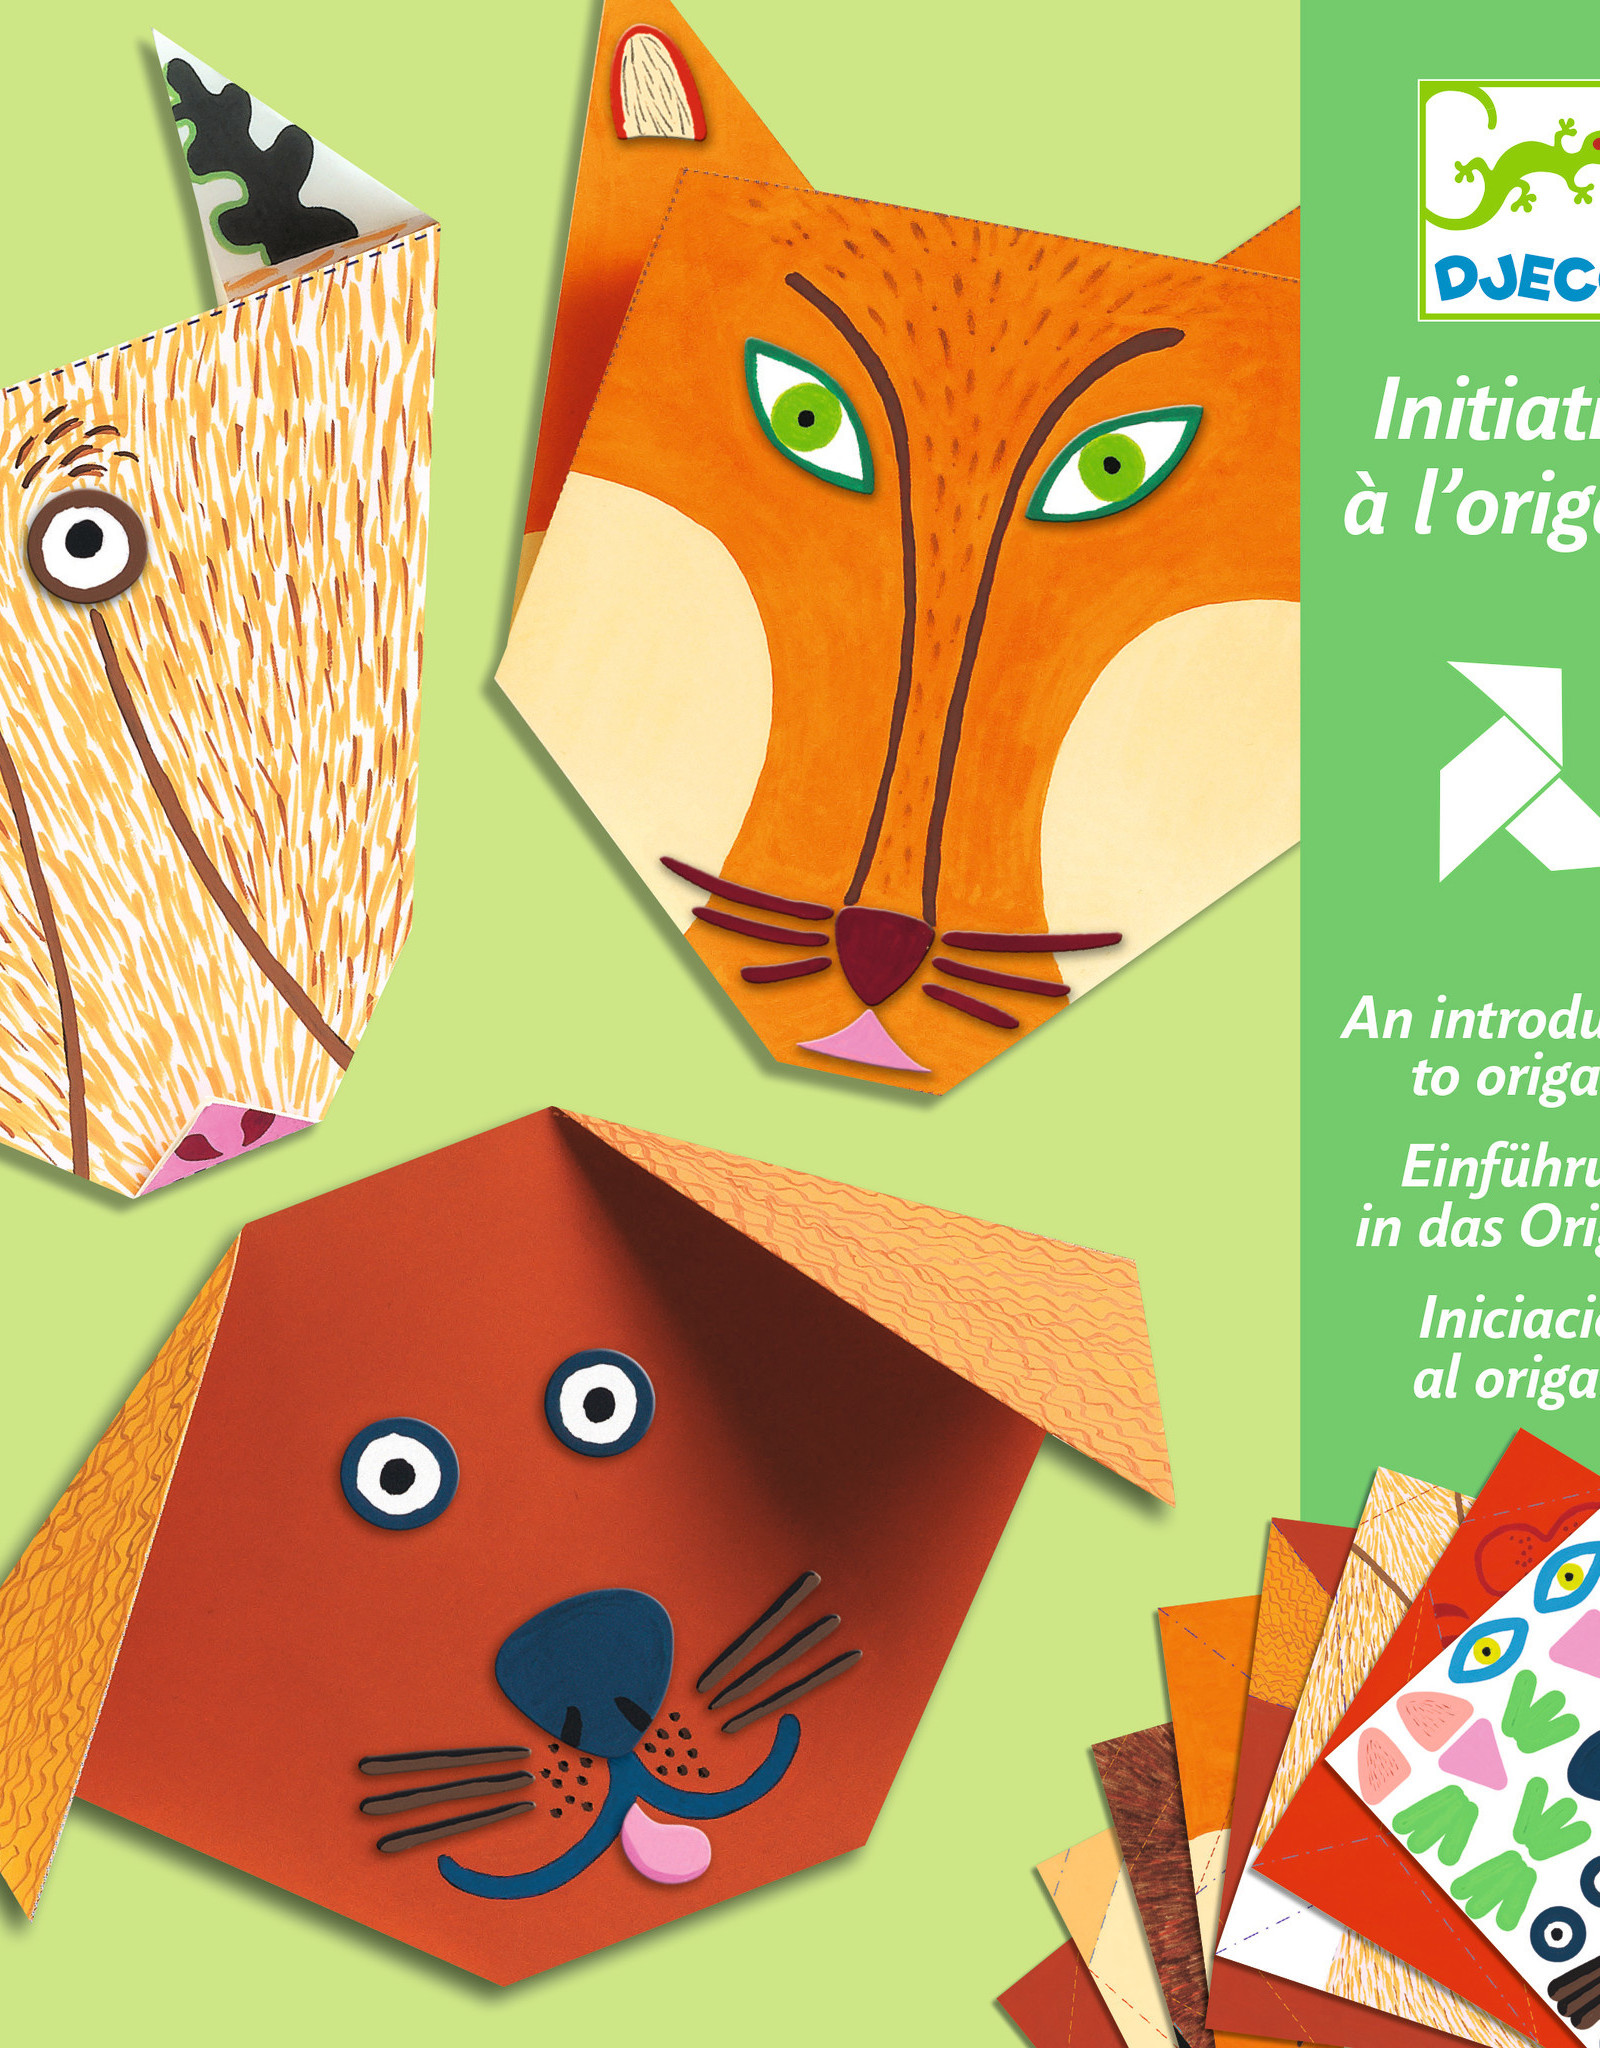 Djeco Origami Animal Faces with Stickers, 7.8" x 7.8", 24 Sheets